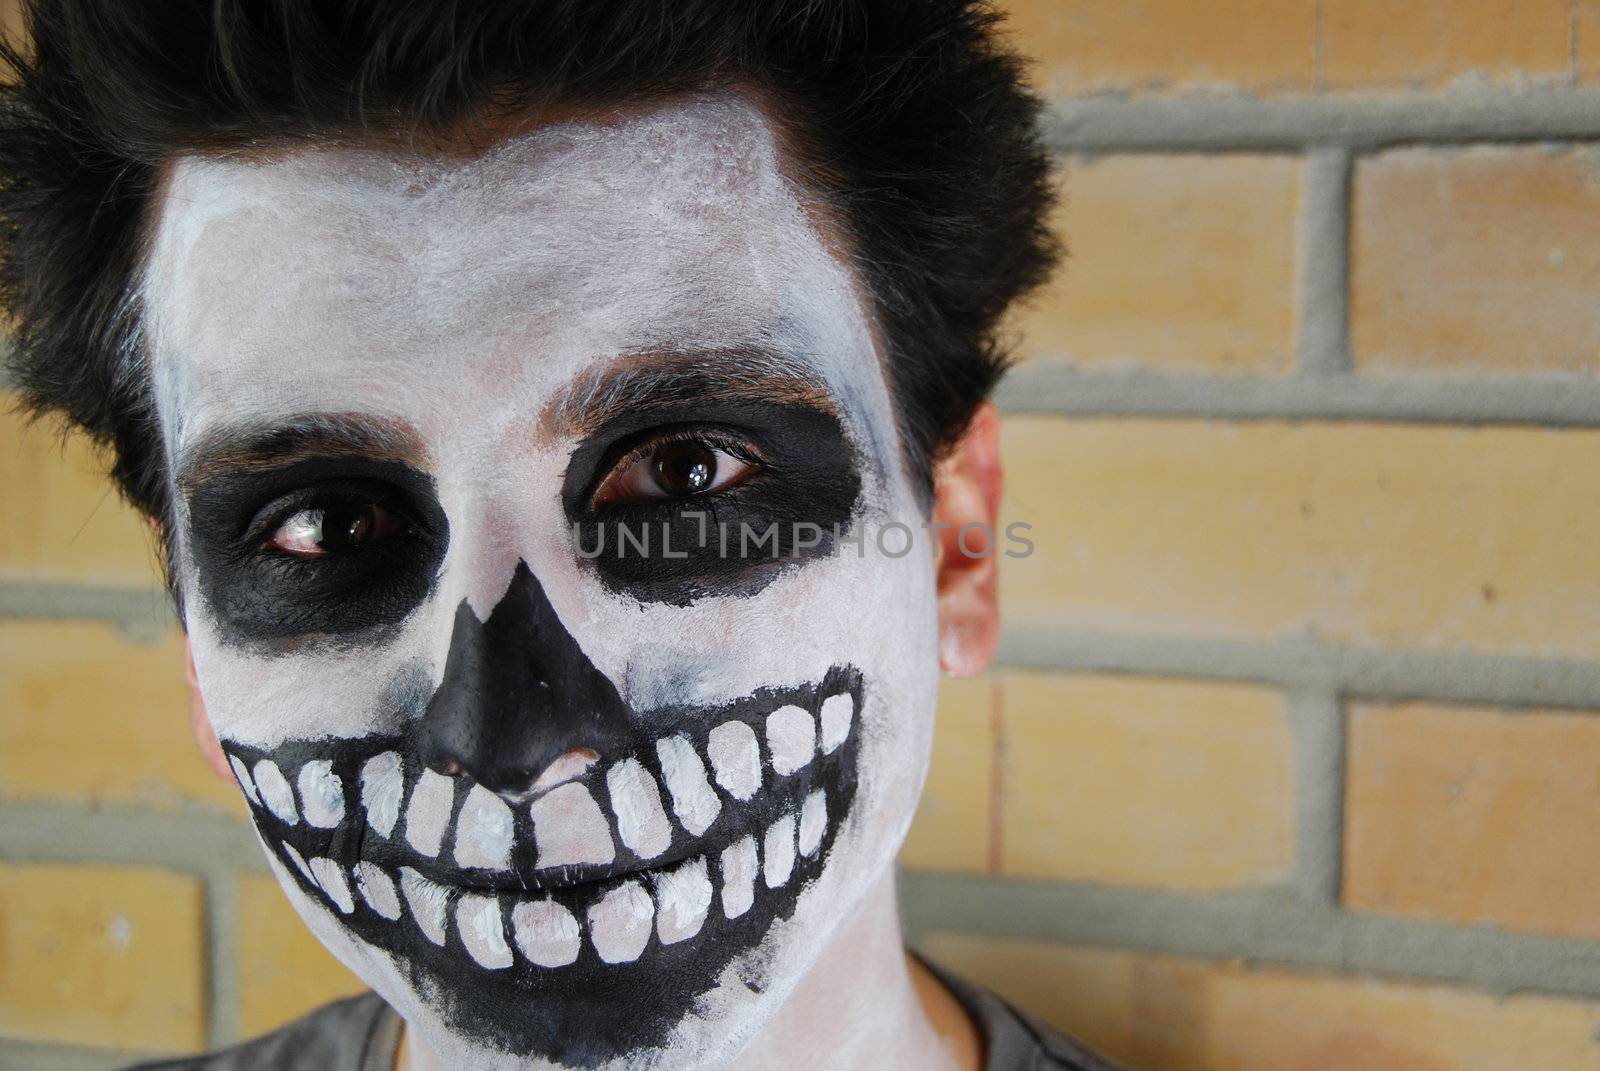 Portrait of a creepy skeleton guy (Carnival face painting) by luissantos84